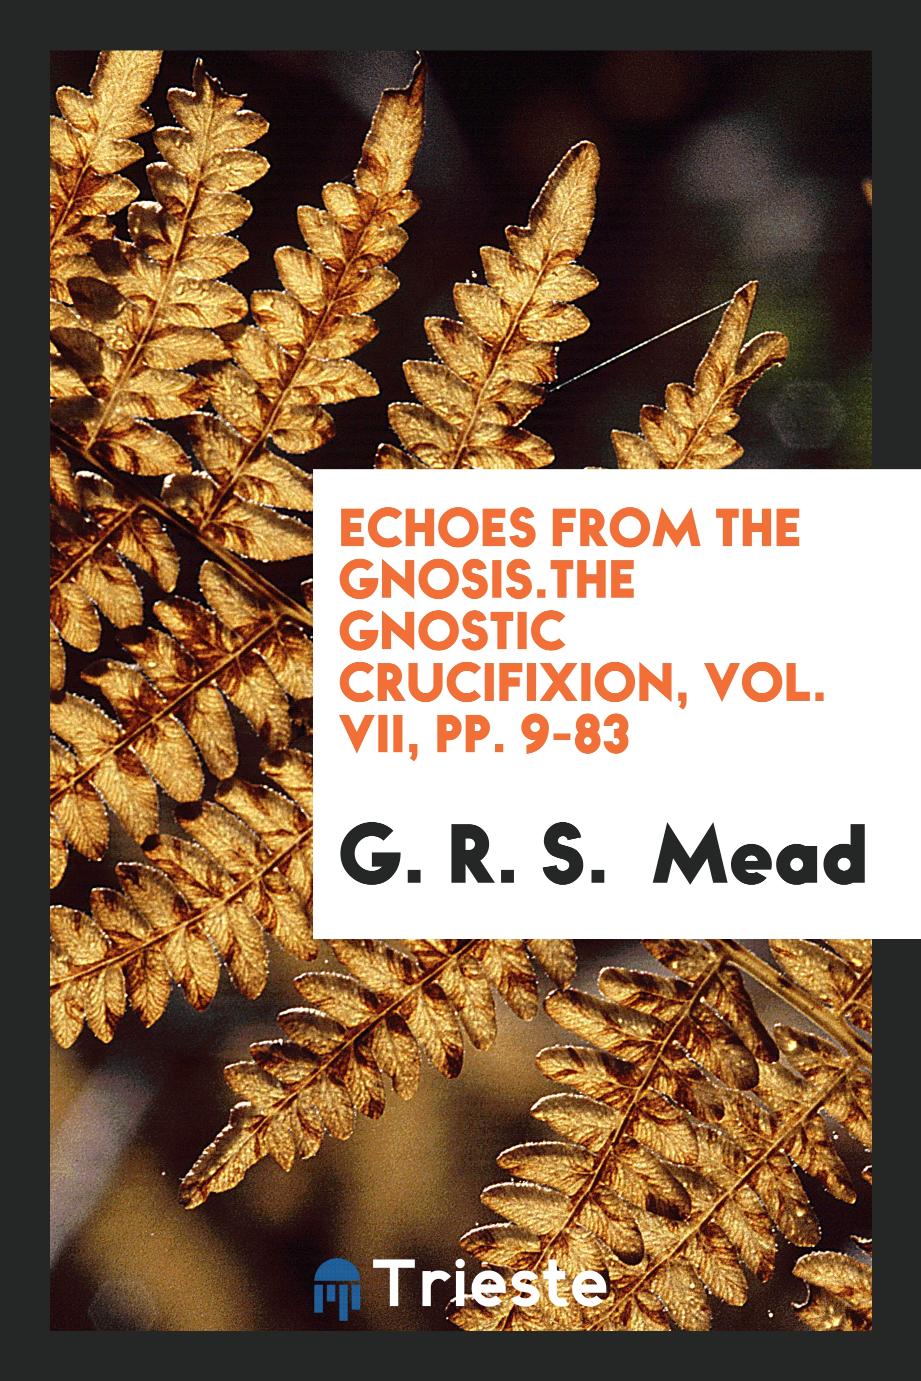 Echoes from the gnosis.The Gnostic Crucifixion, Vol. VII, pp. 9-83